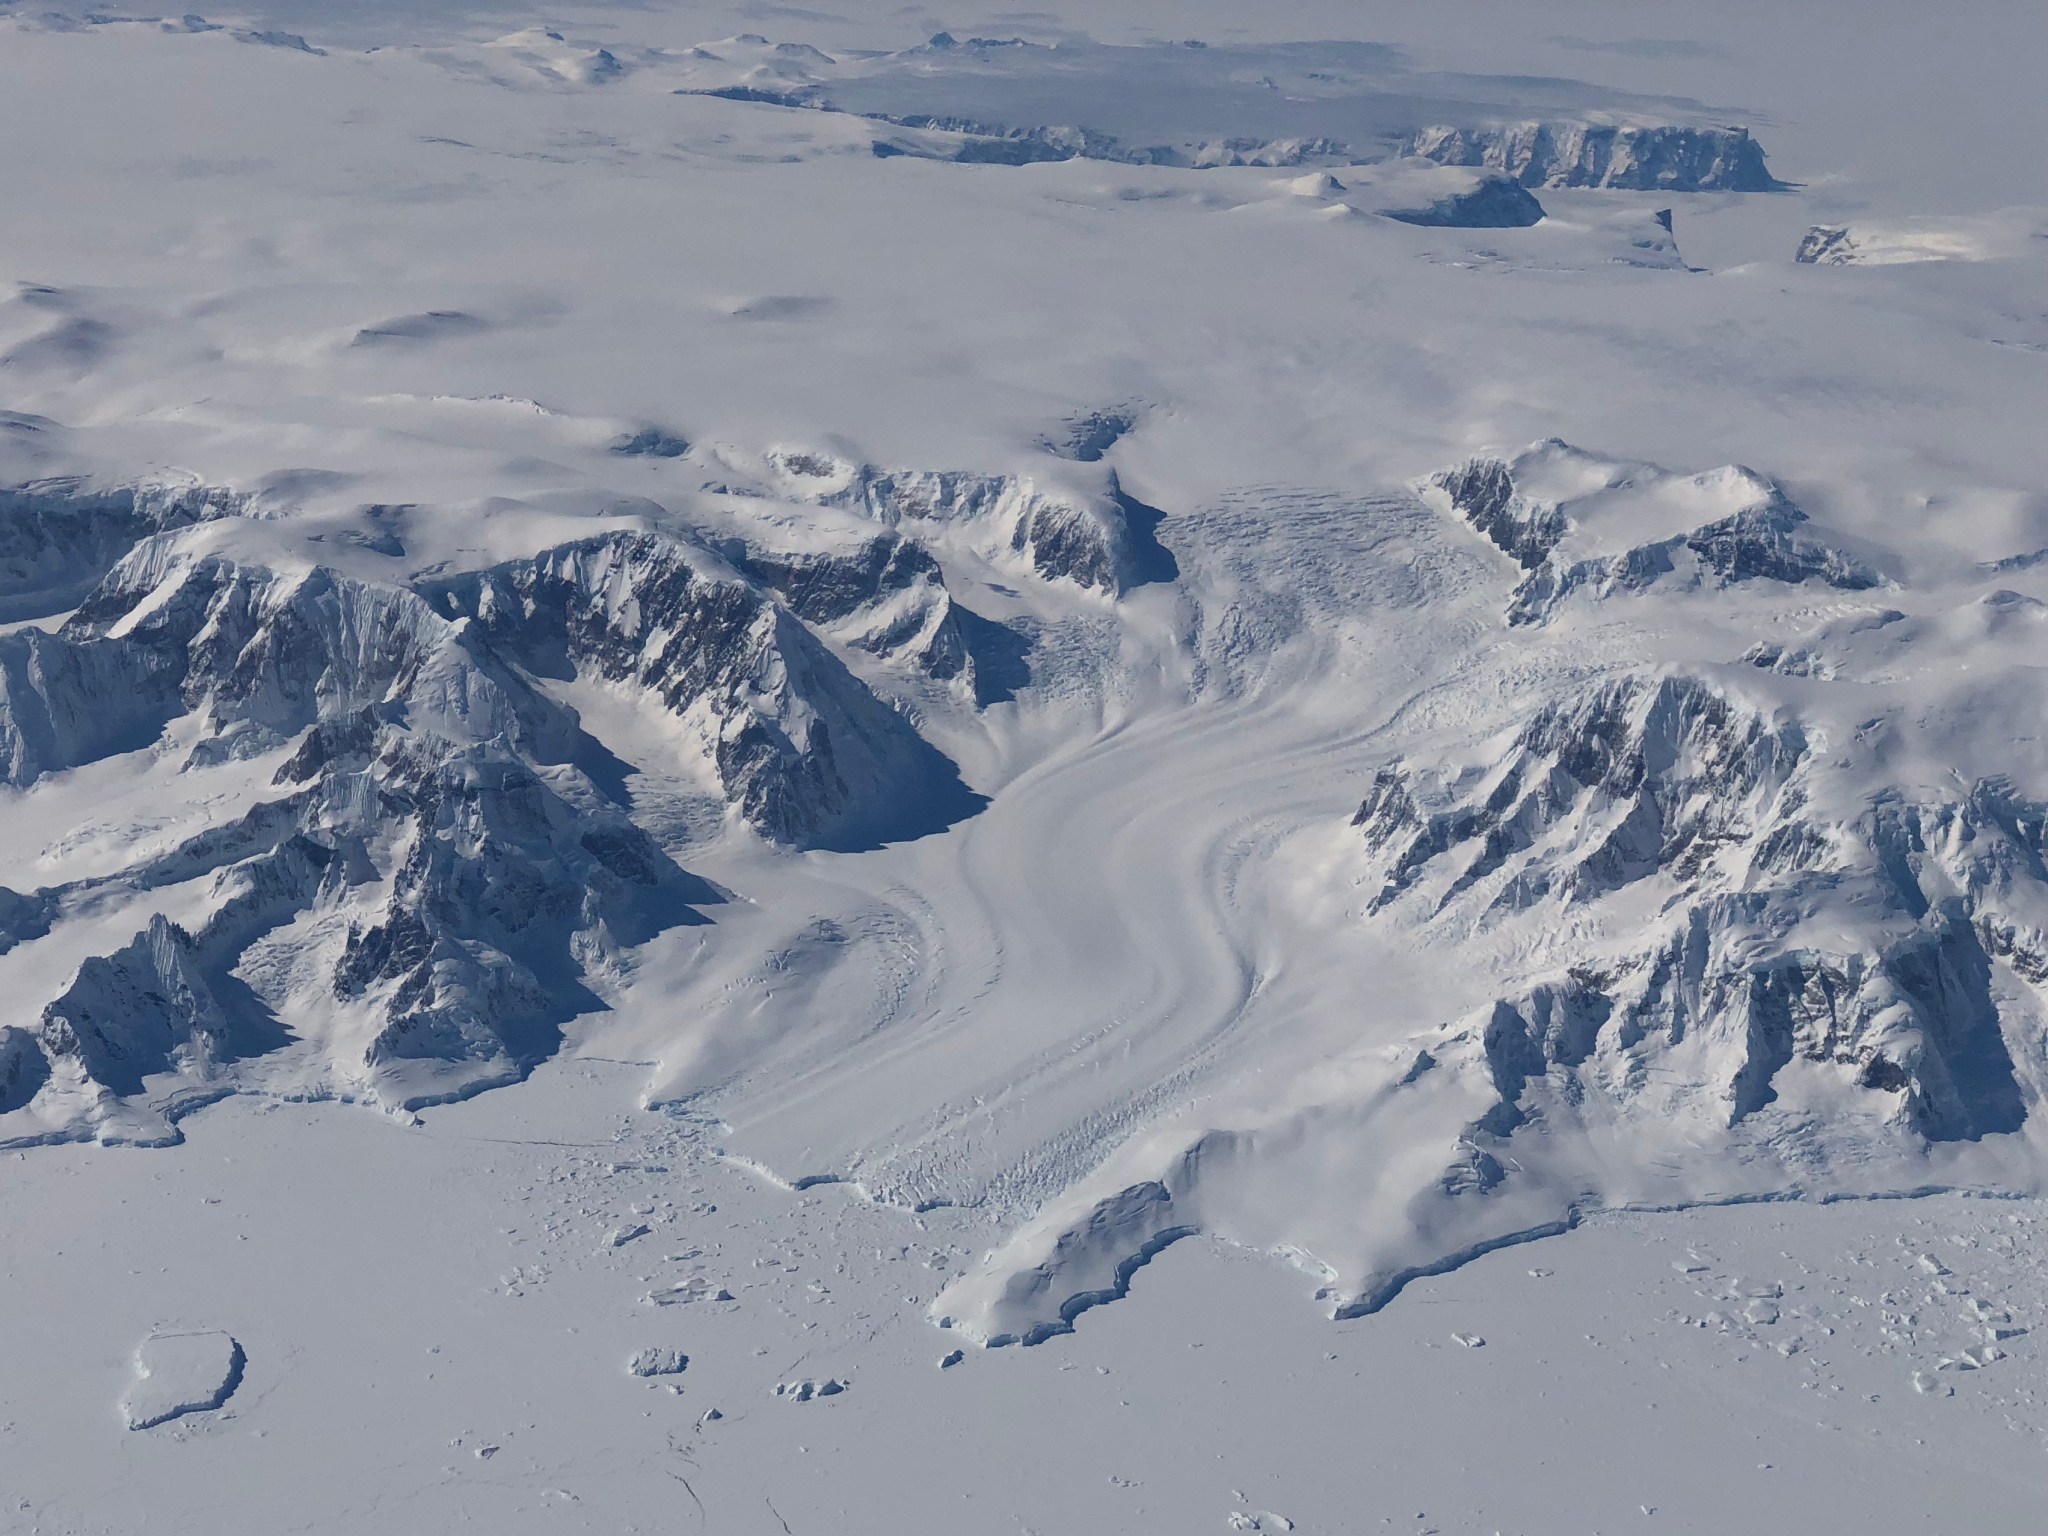 A photo of a glacier on the Antarctic Peninsula, flowing into the Bellingshausen Sea. The glacier looks like a frozen white river winding until it hits the flat extent of the sea ice.